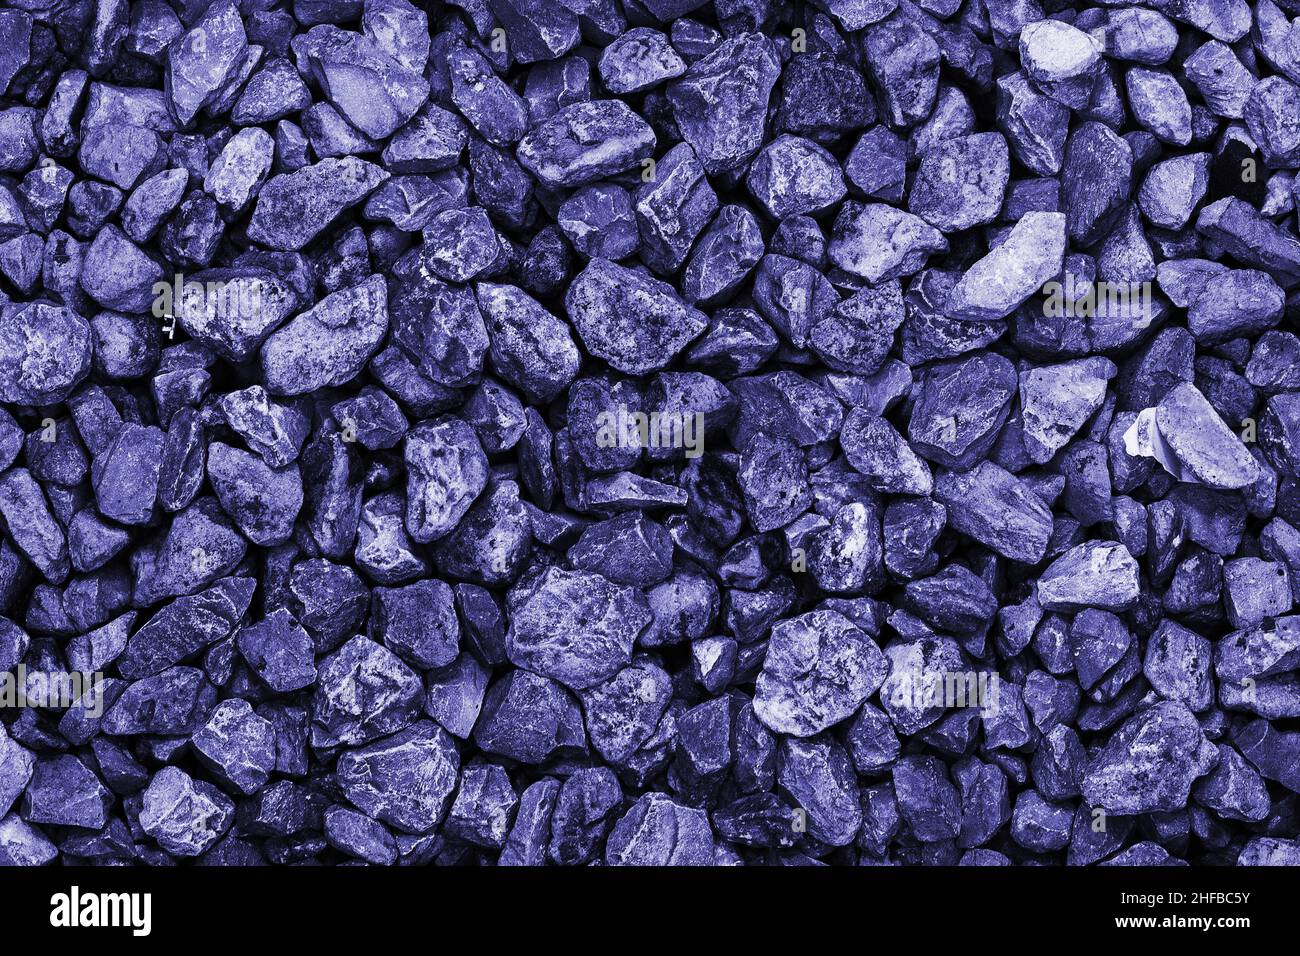 Lots of wet rocks. Pebble background. Lots of purple gems. Modern luxury background or layout with space for text. Color 2022 is very peri year. Stock Photo